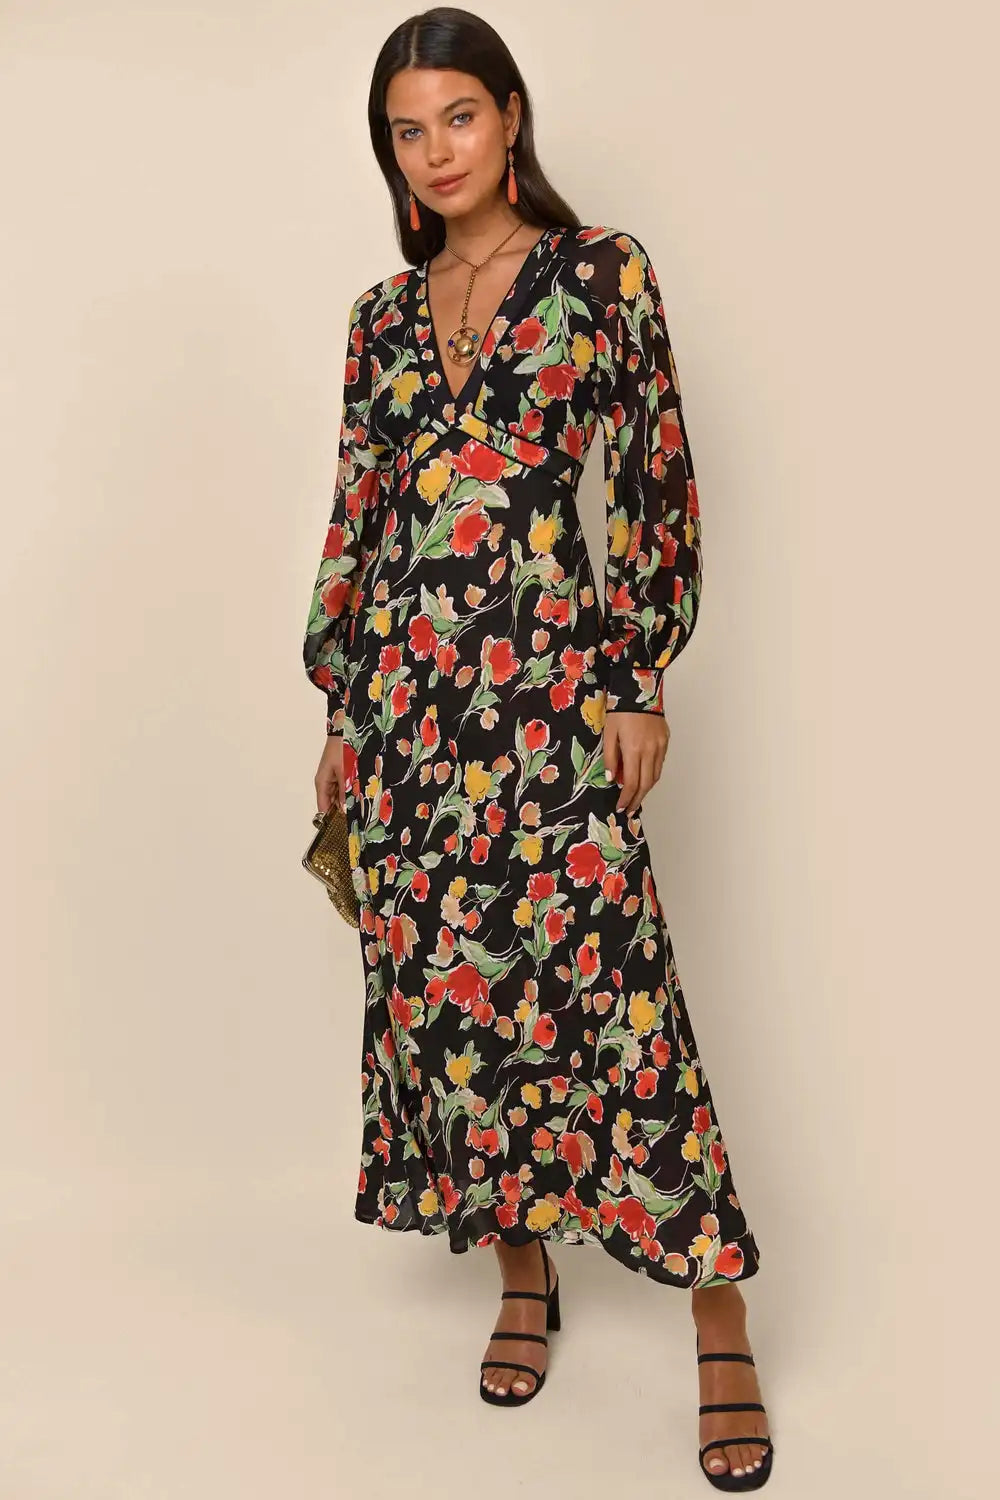 Introducing Dress Ayla, a silk midi dress with a stunning floral print. Made with high-quality materials, this dress exudes elegance and sophistication. Perfect for any occasion, it's sure to make you stand out in style. Enhance your wardrobe with Dress Ayla and elevate your look.